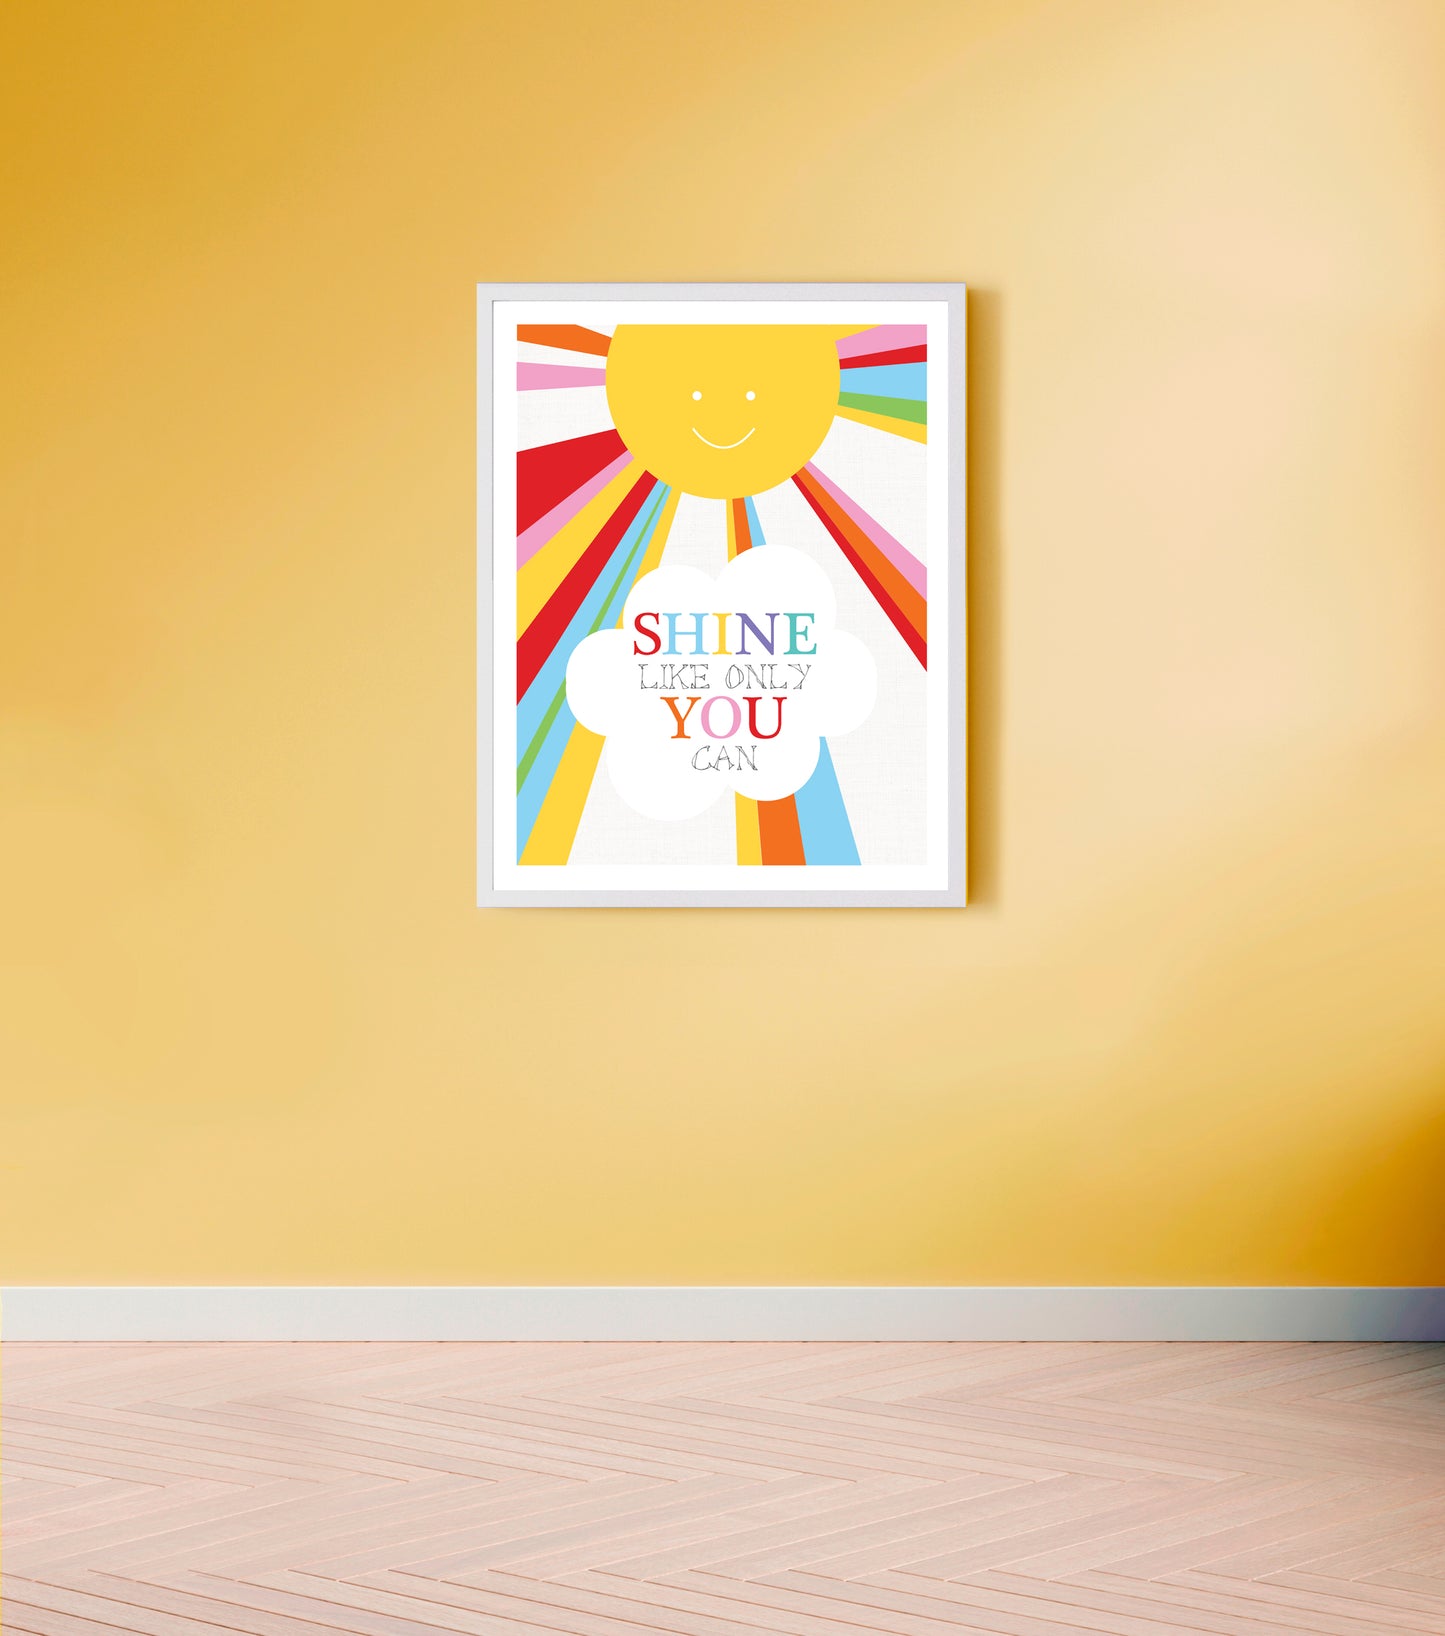 Shine like only you can print